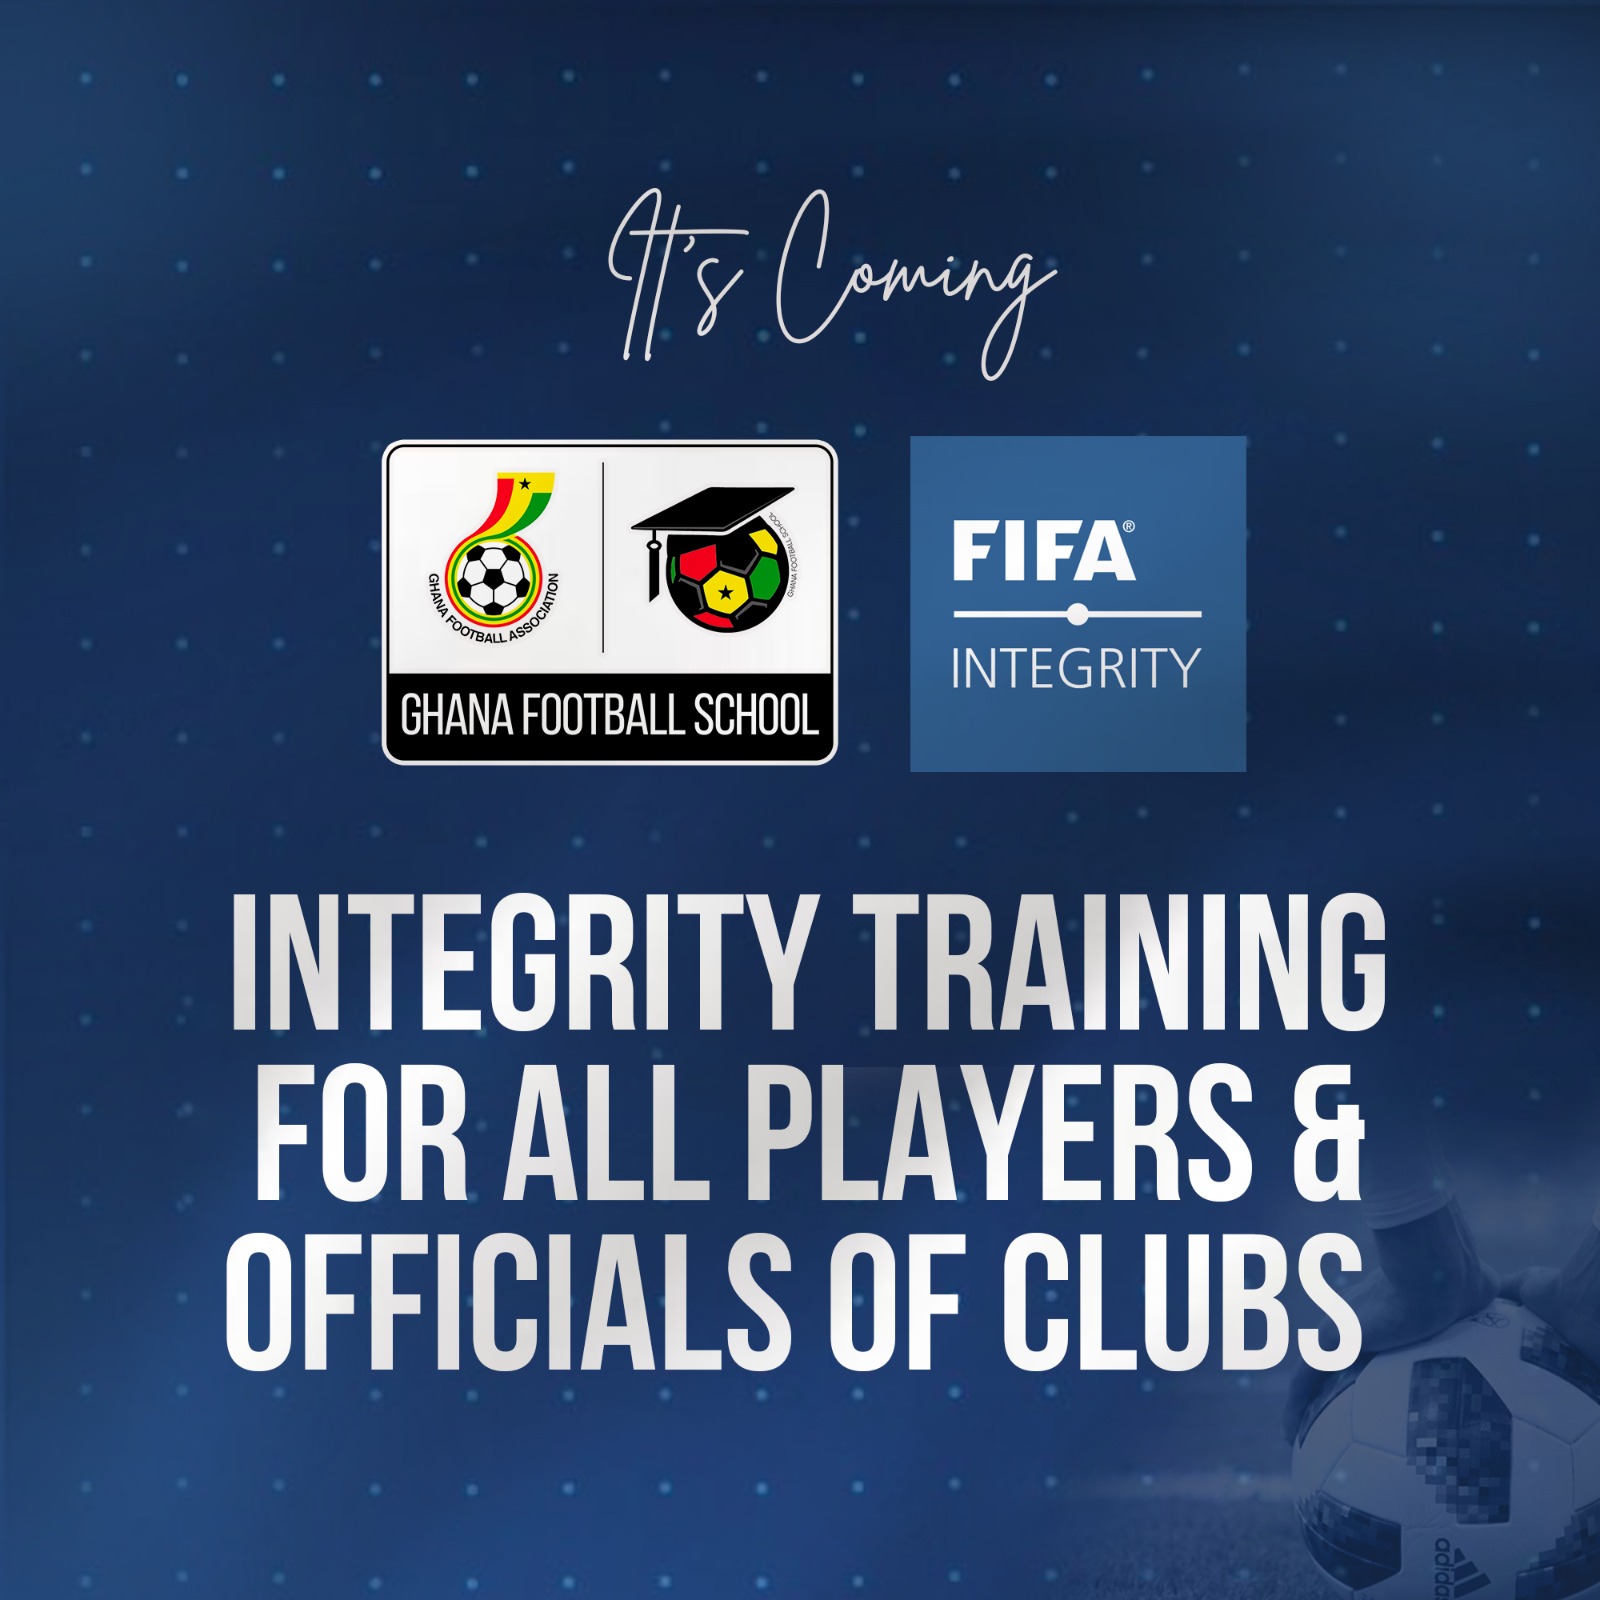 Integrity training for players and officials of elite clubs ahead of new season